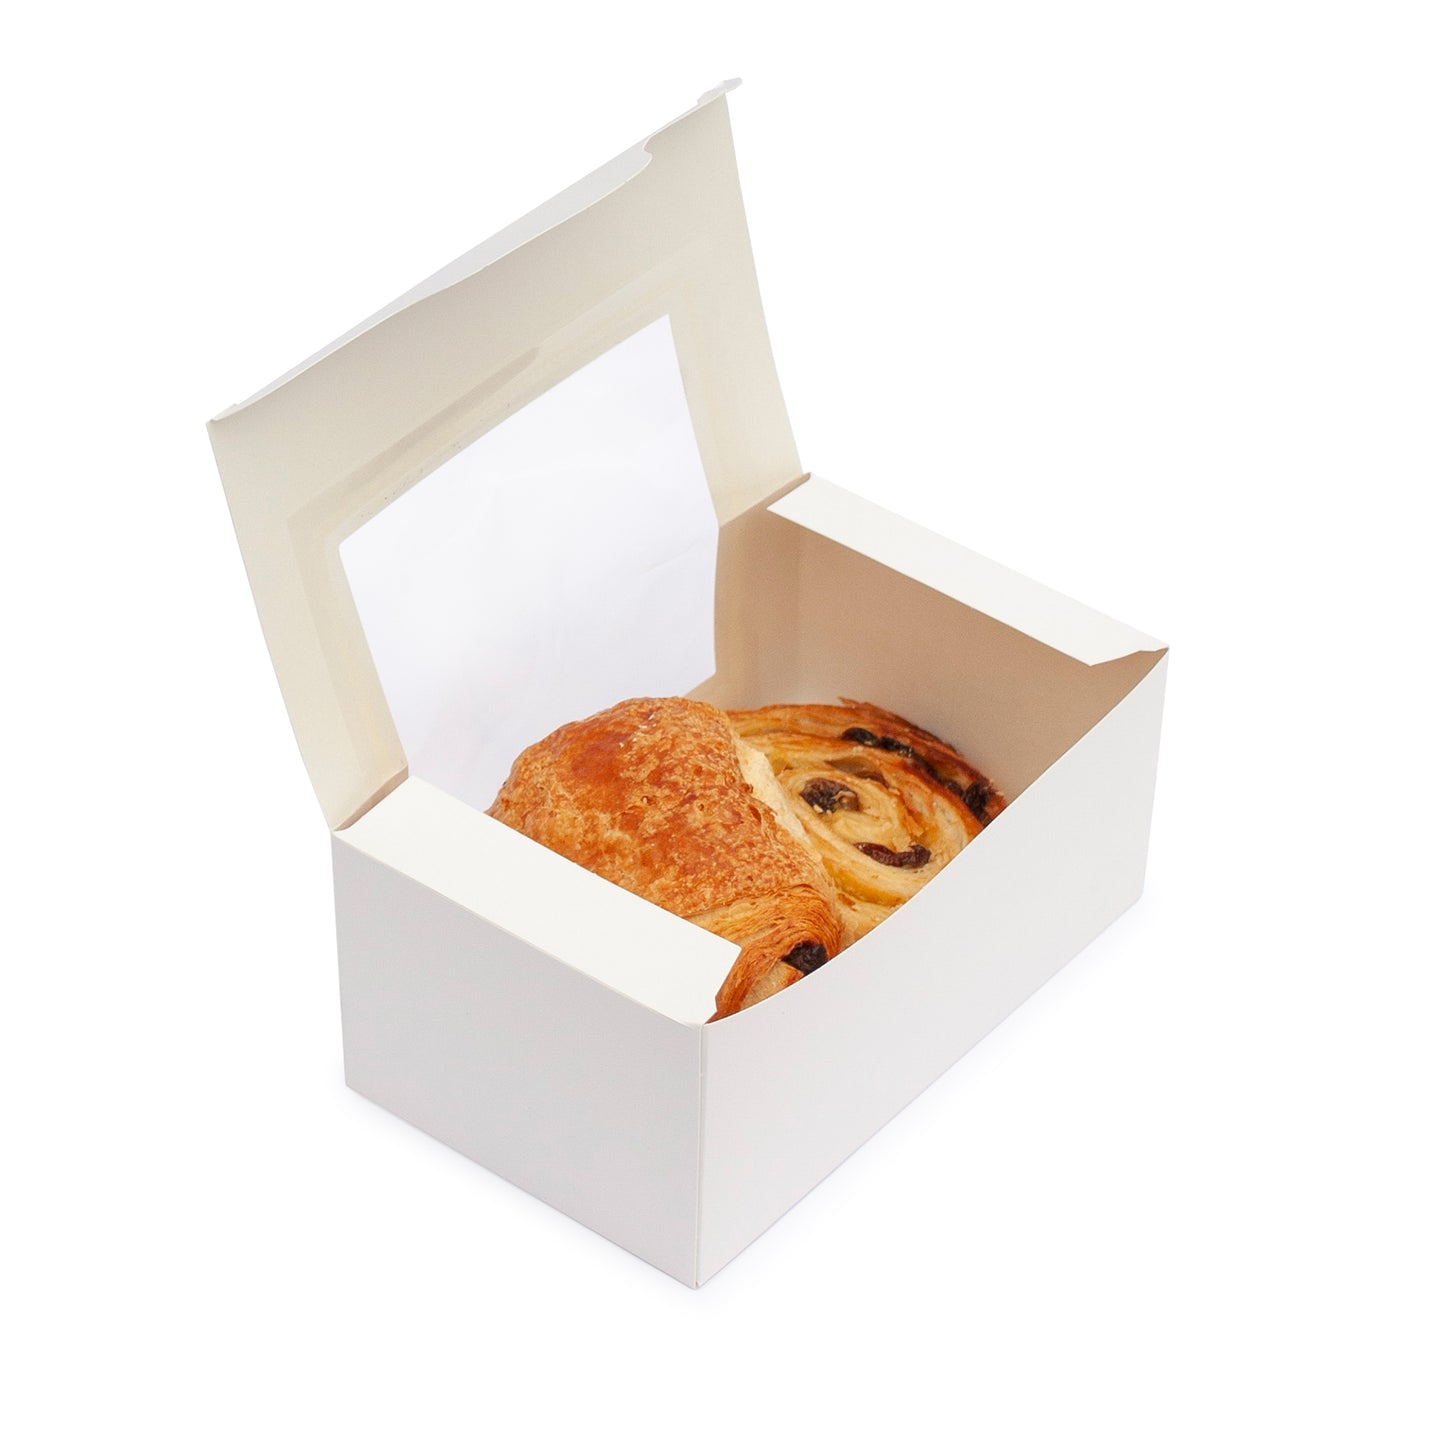 Cupcake 2 boxes 179x110x80mm (Compostable PLA window)